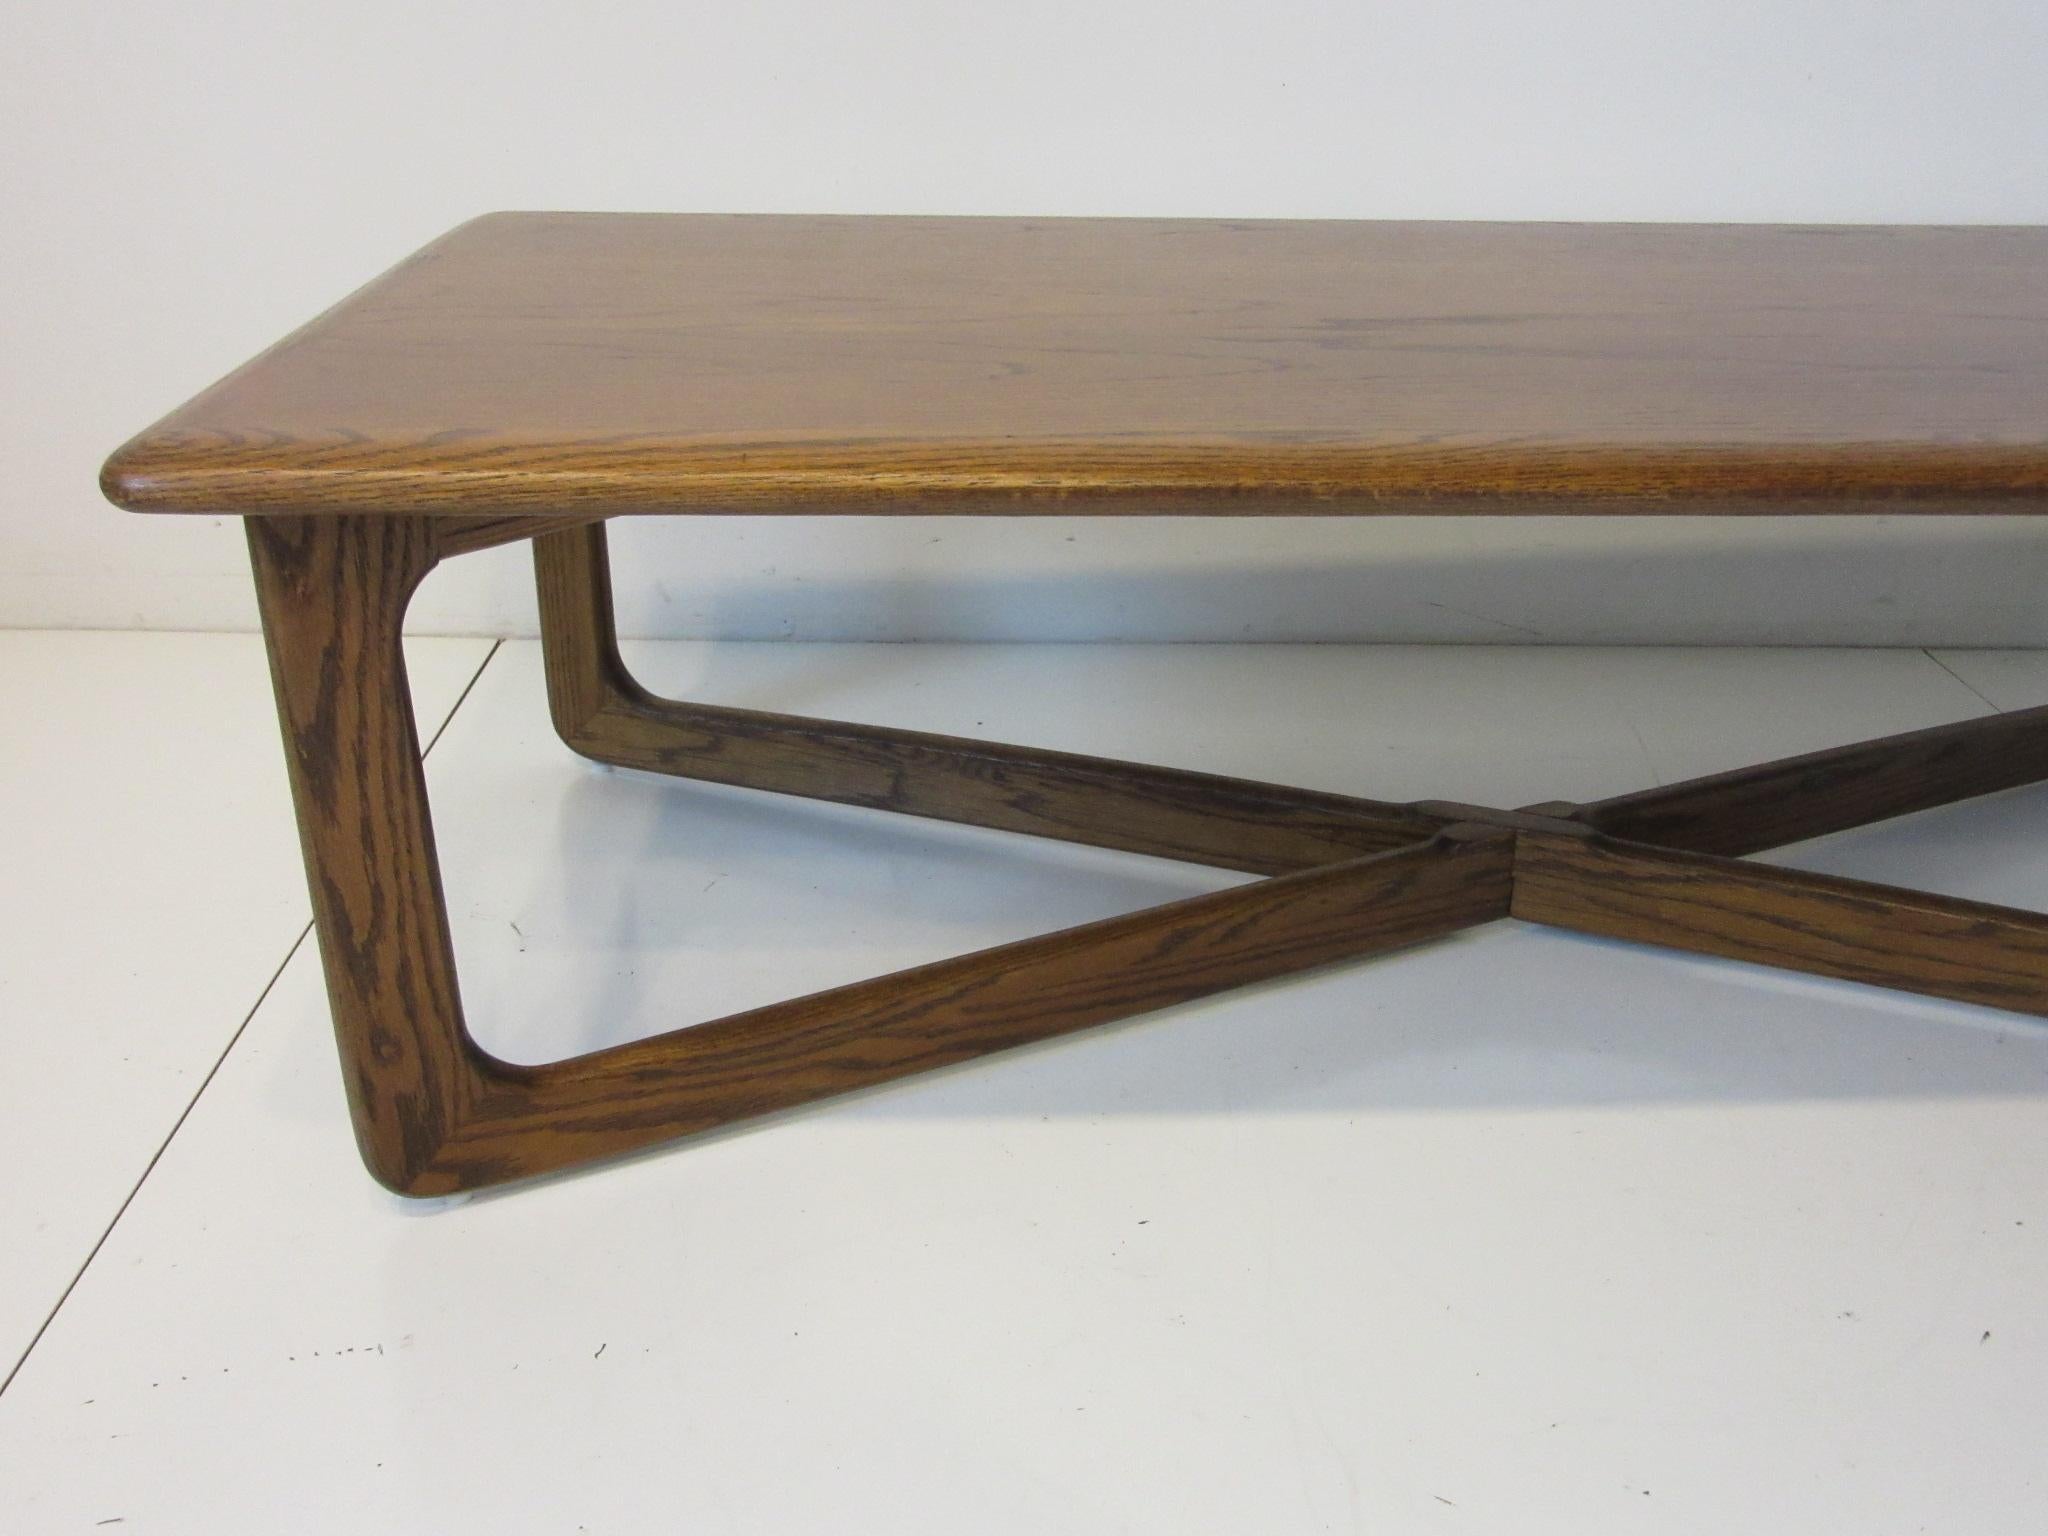 A medium walnut finished coffee table with X base having wonderful graining to the top and rounded edges. Well constructed and retains the branding mark to the bottom, manufactured by the Lane furniture company from their Perception collection.